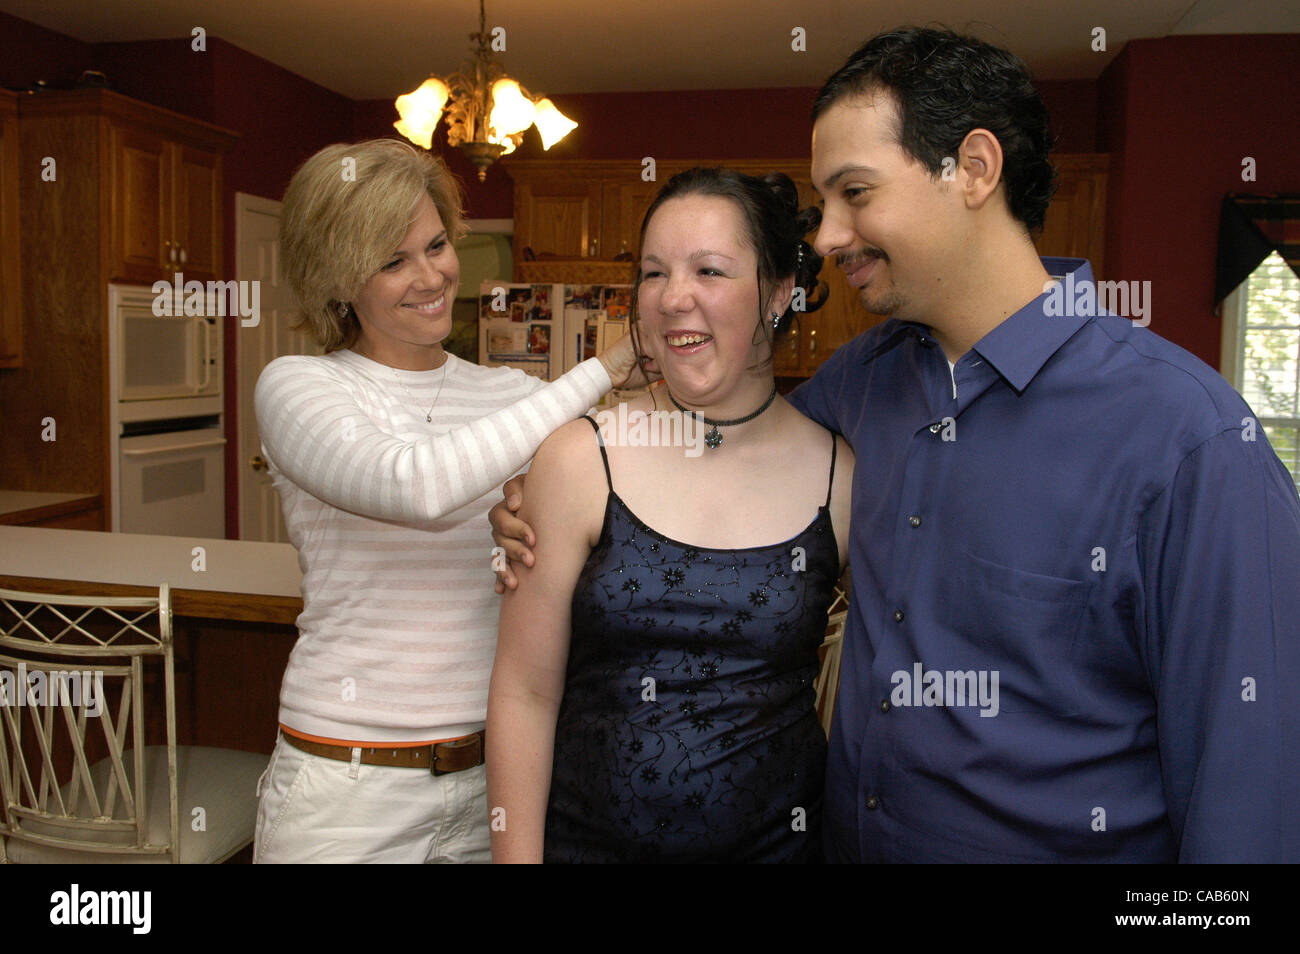 May 05, 2004; Woodstock, GA, USA; KIM RICHARDSON of Woodstock, adjusts her daughter KARISSA'S hair before she and her date SALOME DE SANTIAGO leave for Special Needs Prom.  Both Carissa and Salome are moderately intellectually disabled and are in the special education programs in the county schools. Stock Photo